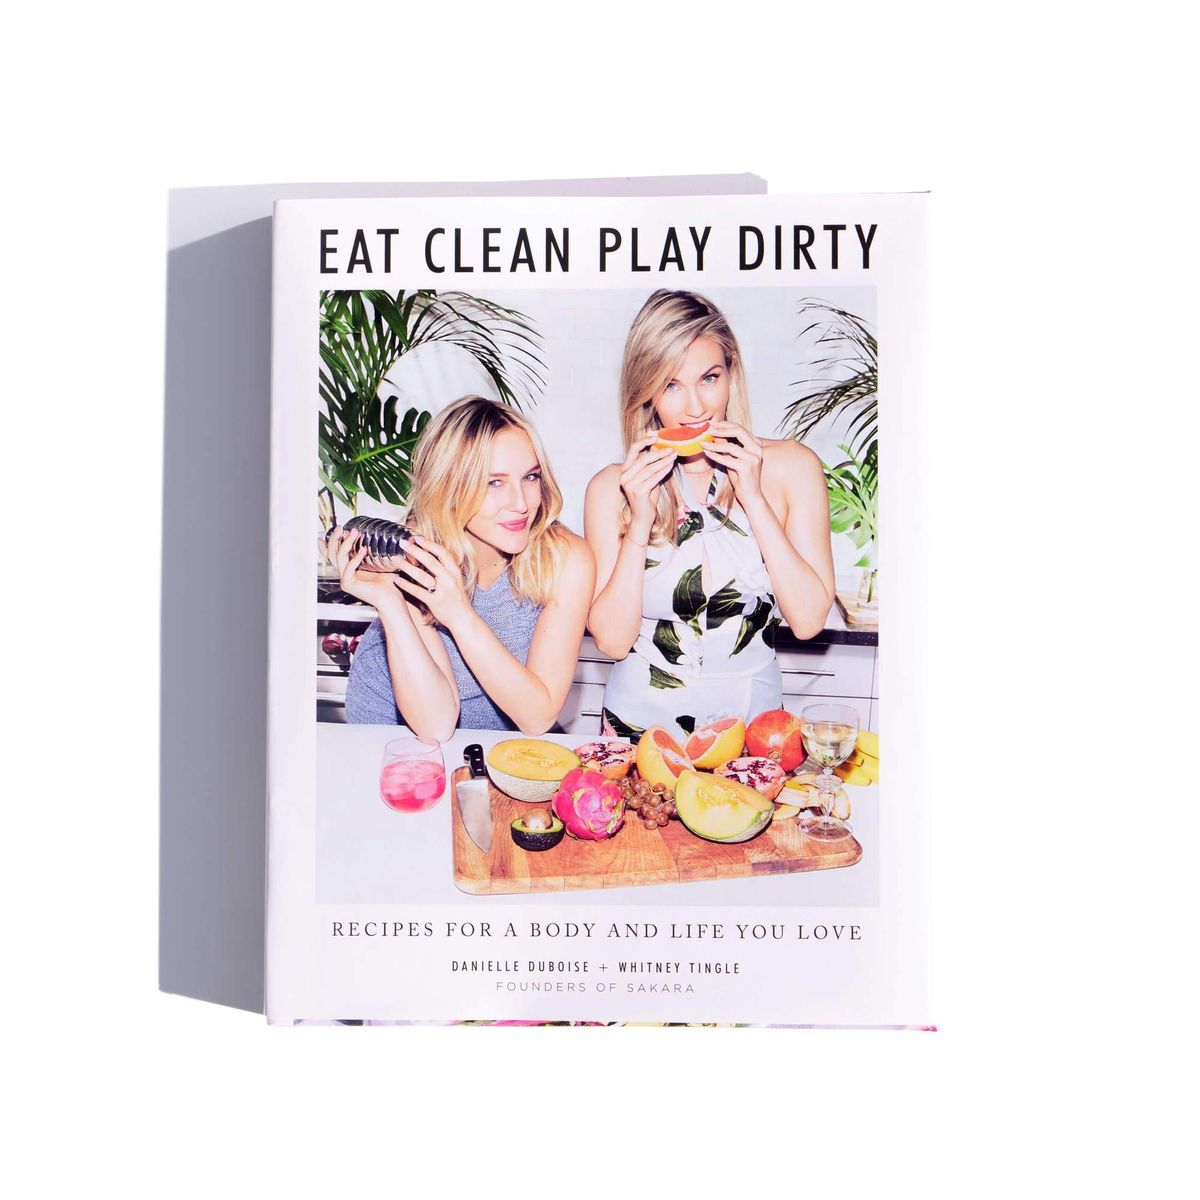 danielle duboise and whitney tingle cookbook eat clean play dirty